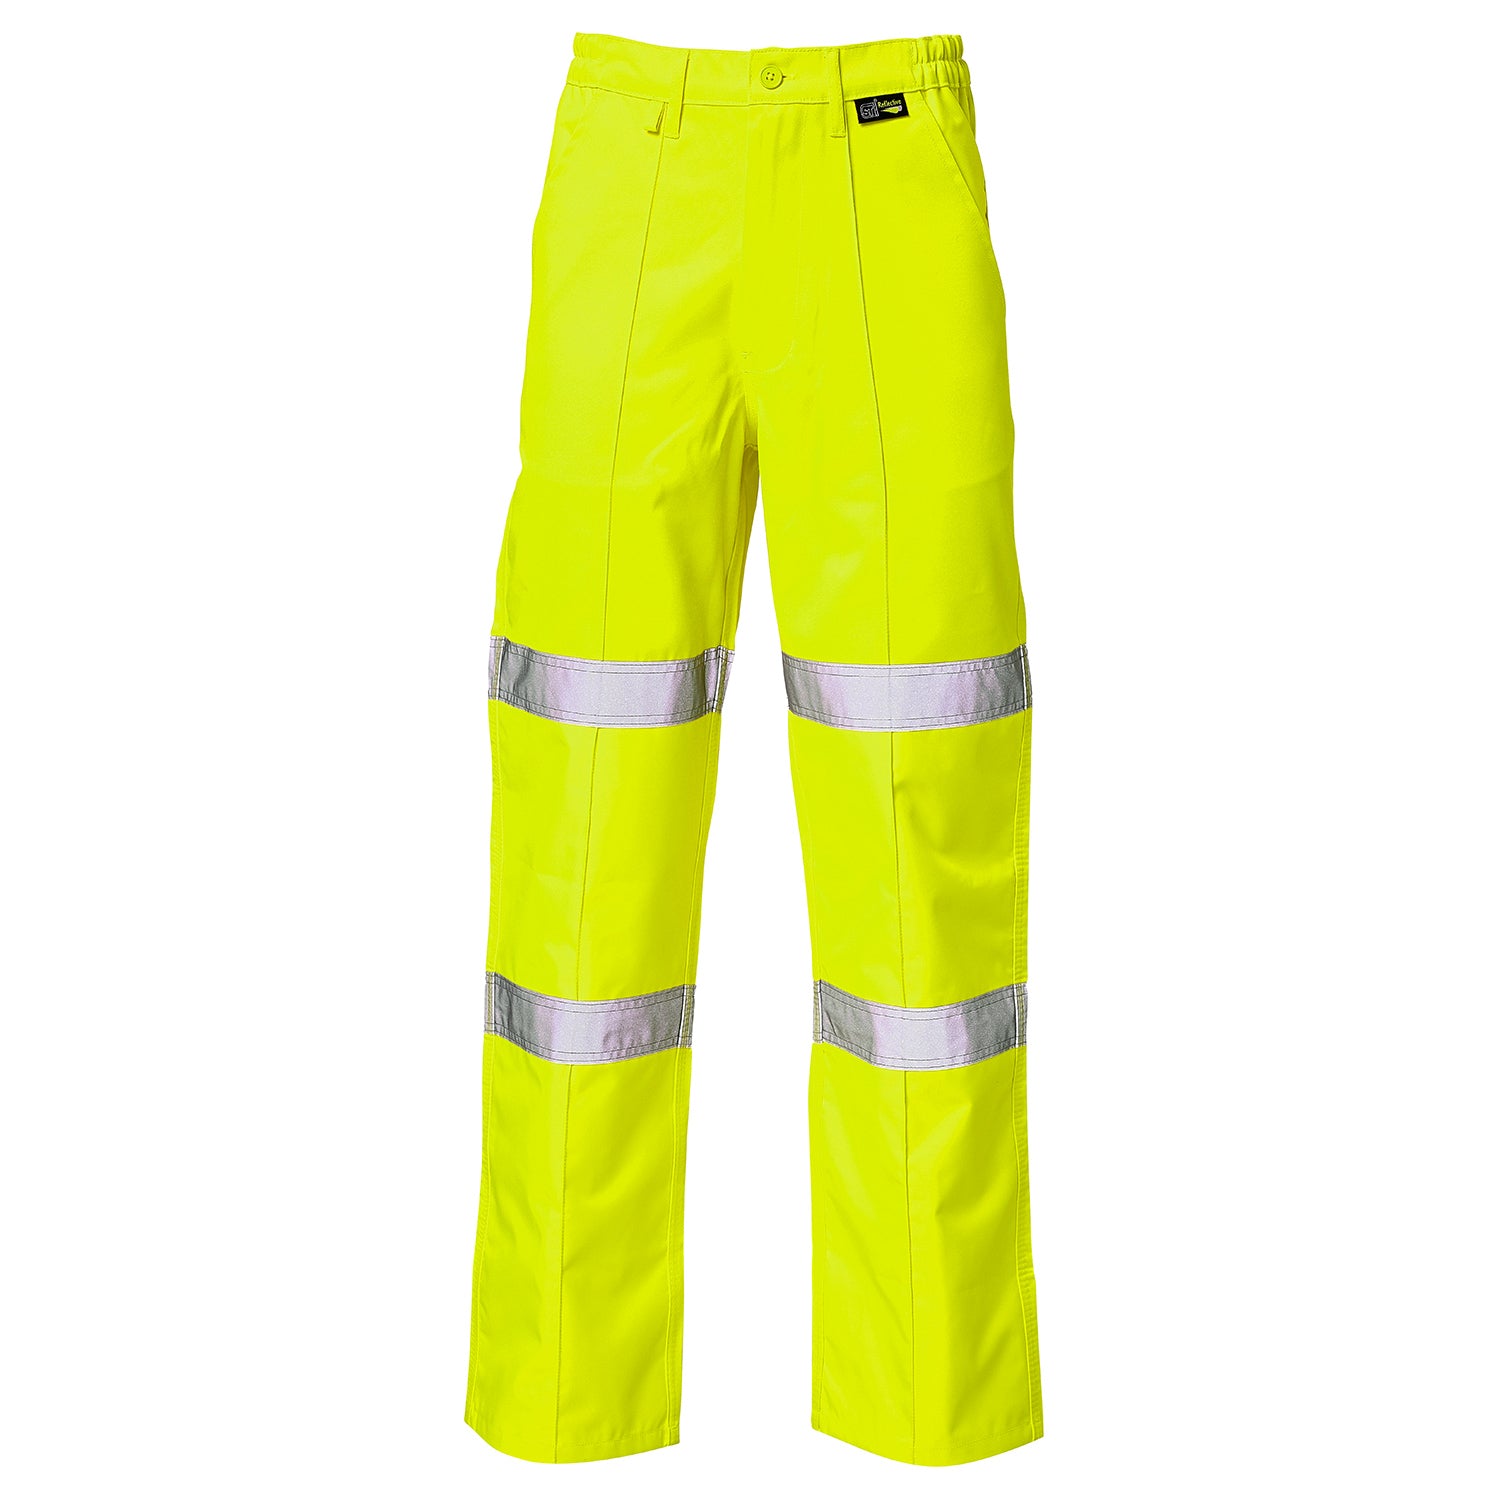 Supertouch Hi Vis 2 Band Ballistic Trousers - Yellow